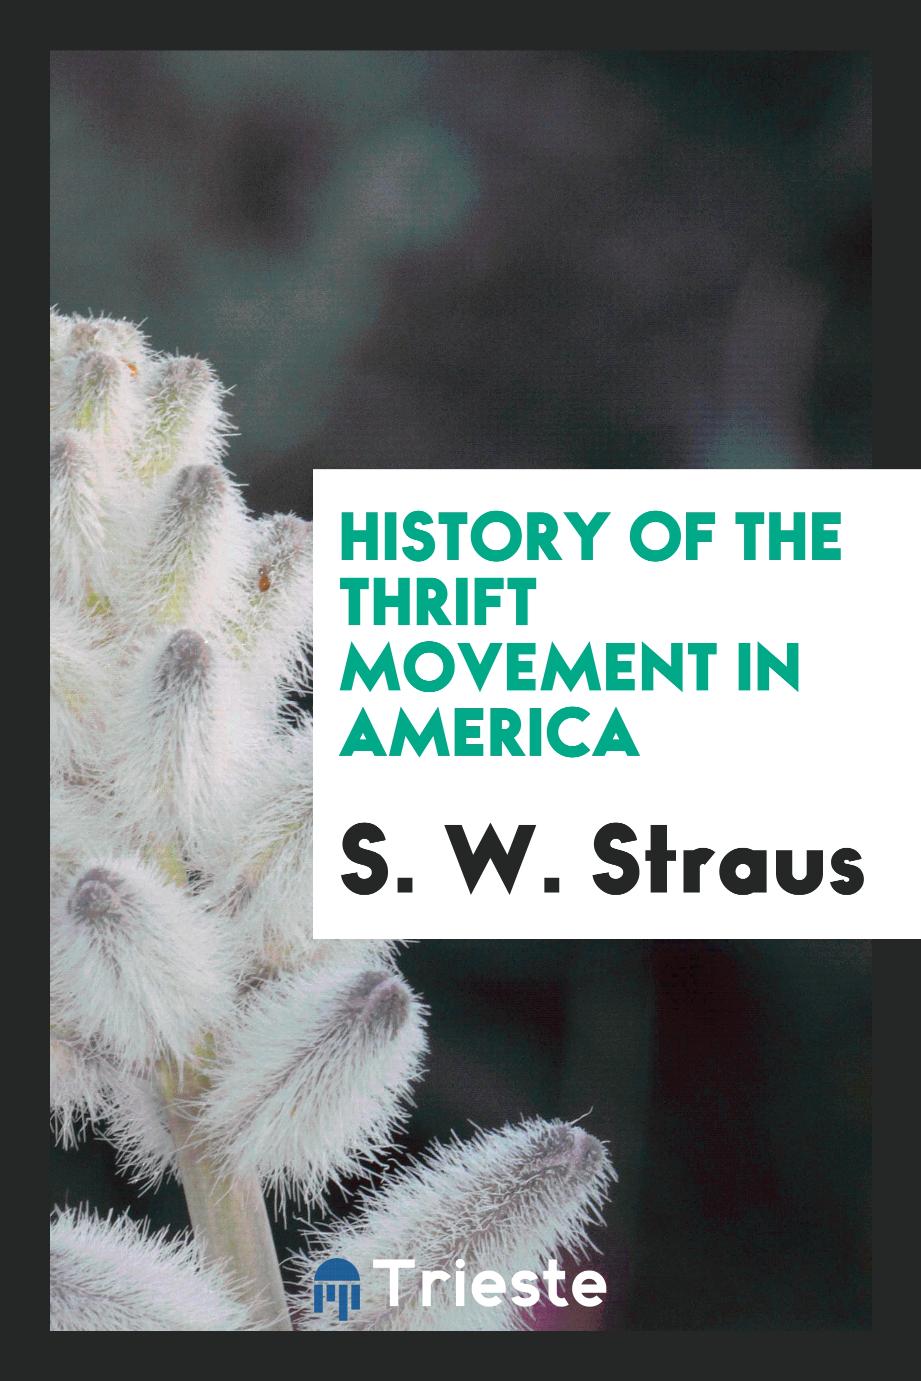 S. W. Straus - History of the thrift movement in America